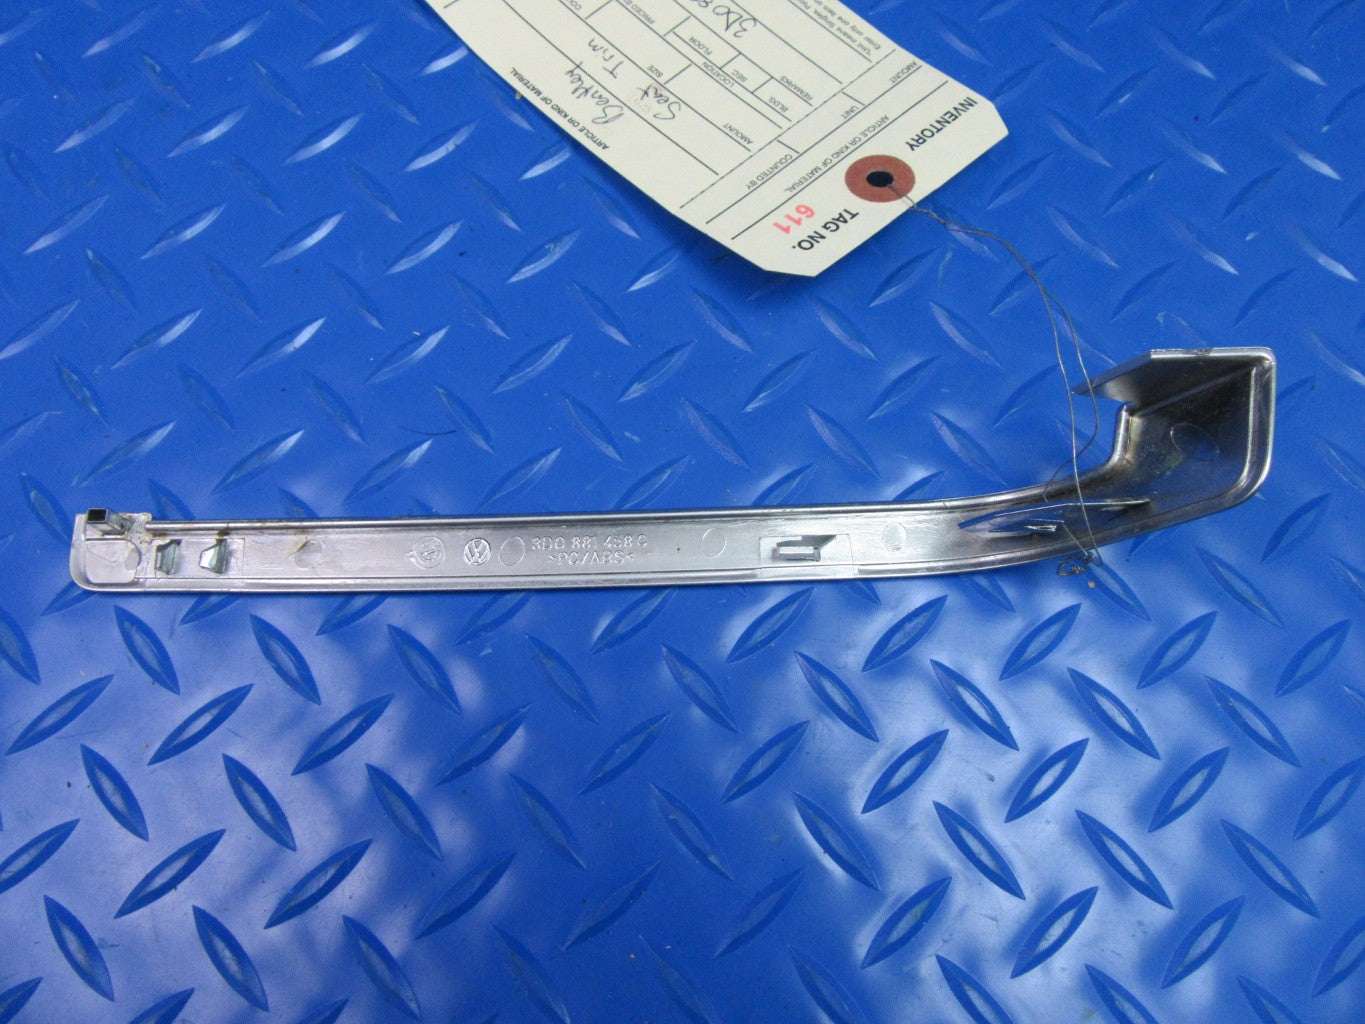 Bentley Continental Flying Spur right front seat frame trim #0611